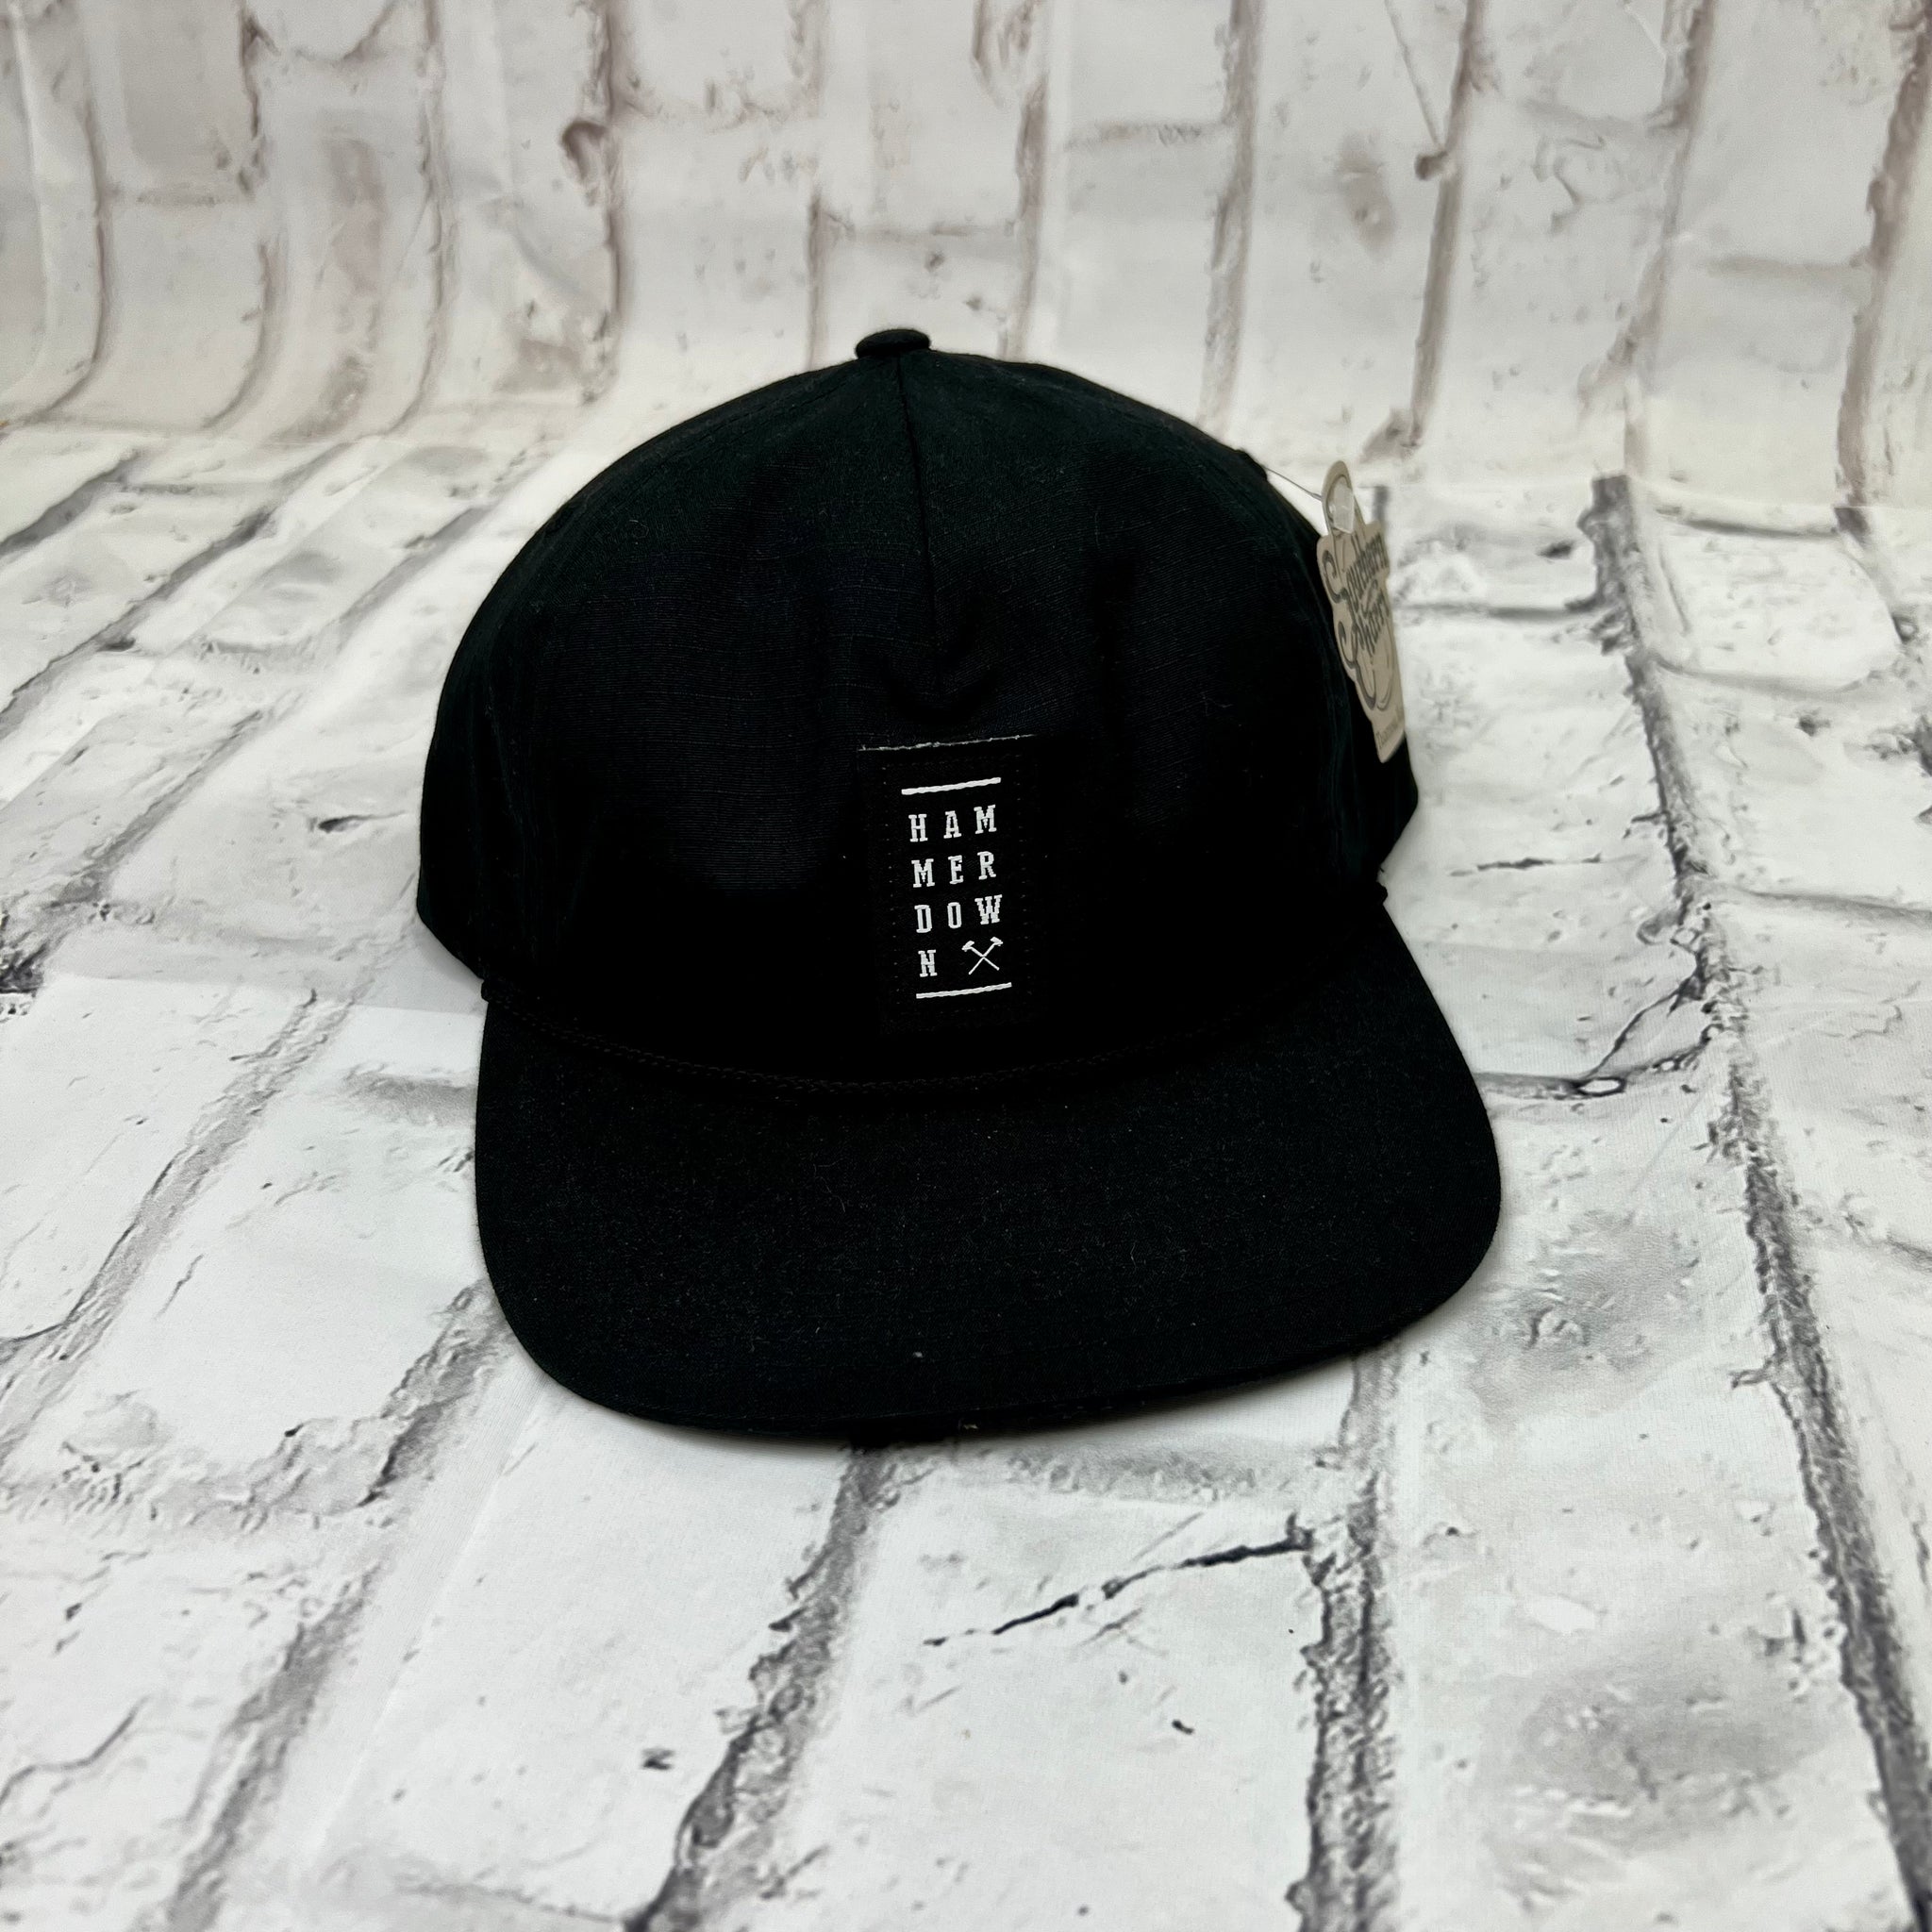 Hammer Down "HD Stack Patch" Hat - Black with Black Rope